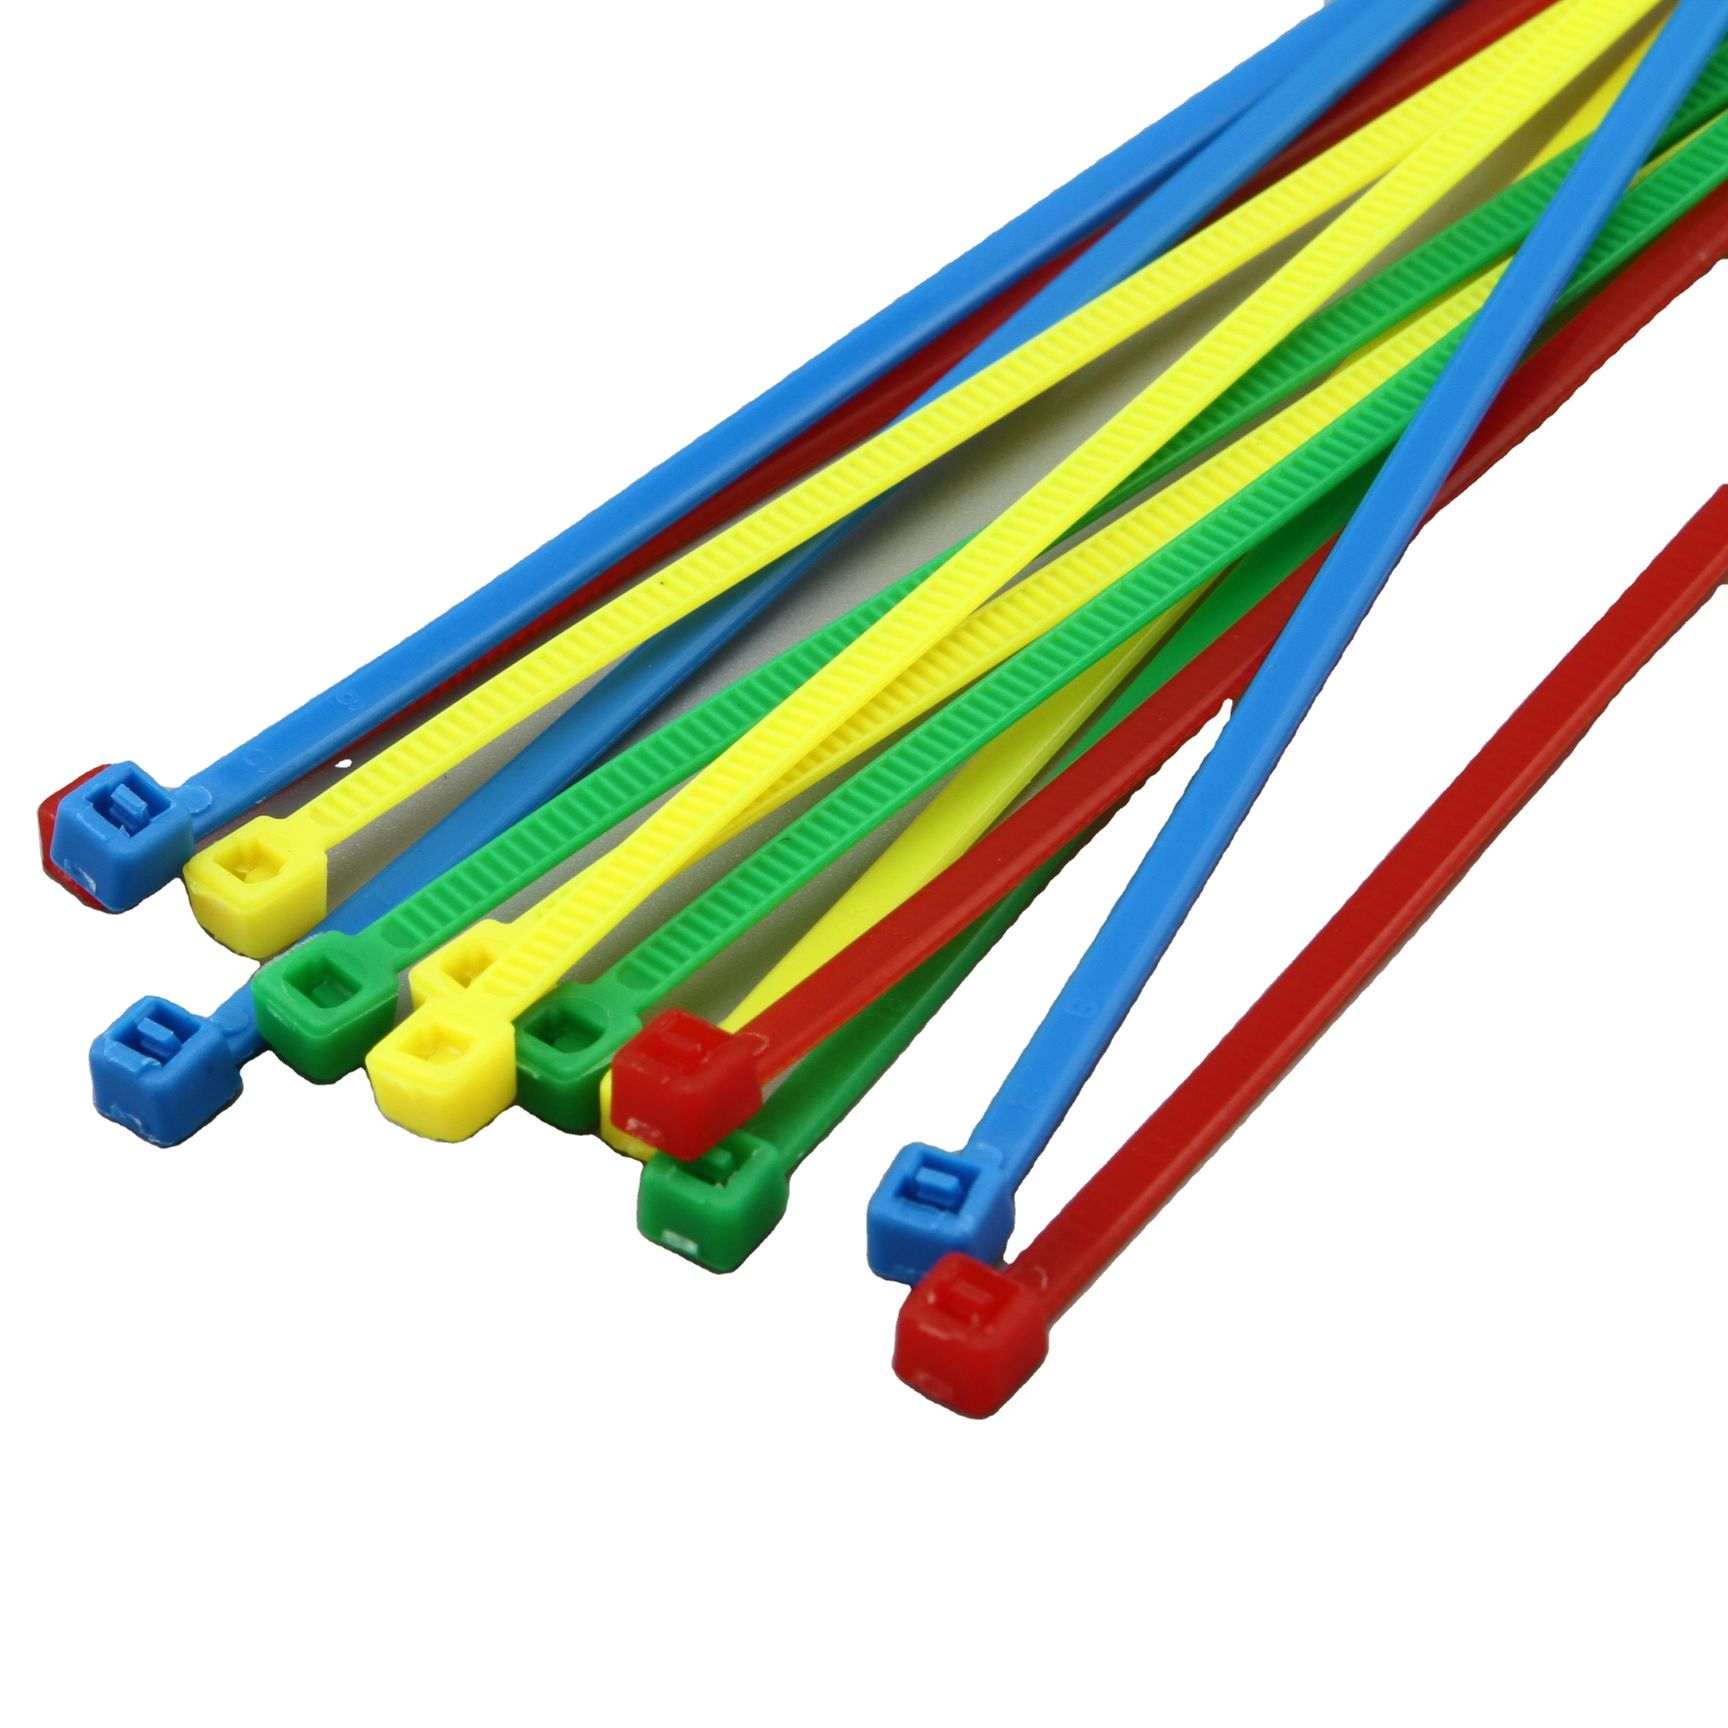 Label cable ties